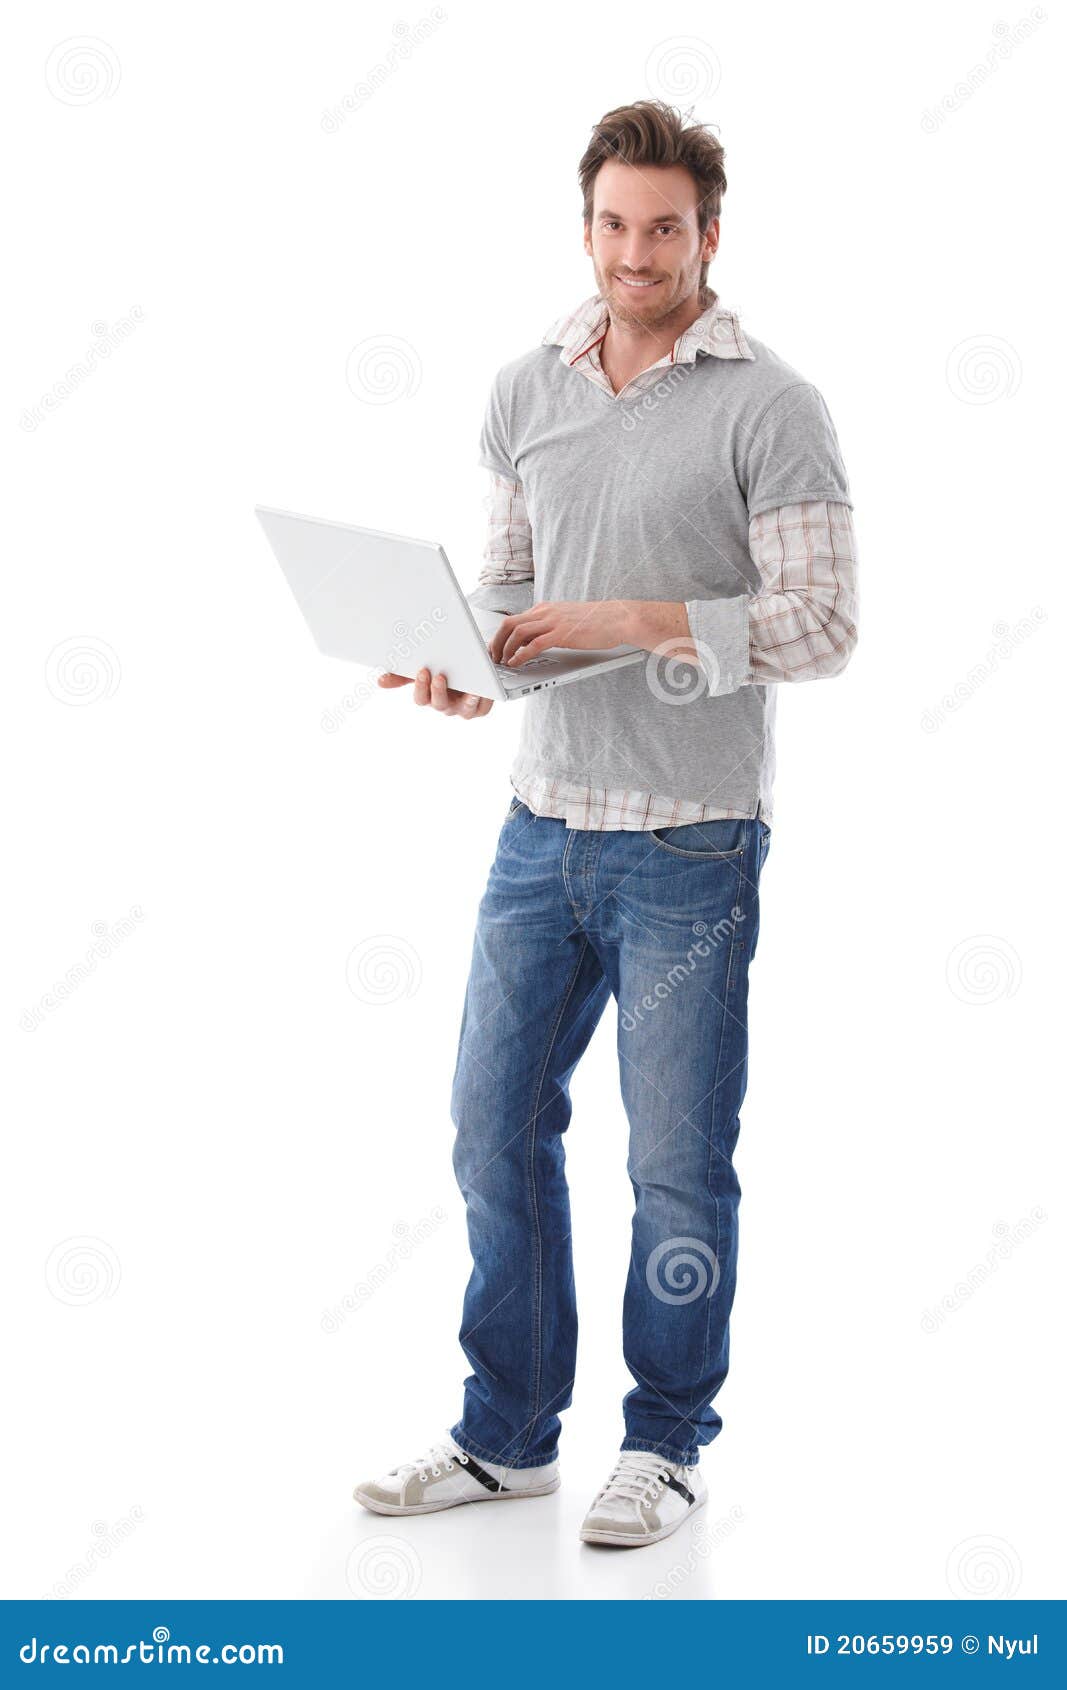 Casual Man Holding Laptop Smiling Stock Image - Image of american ...